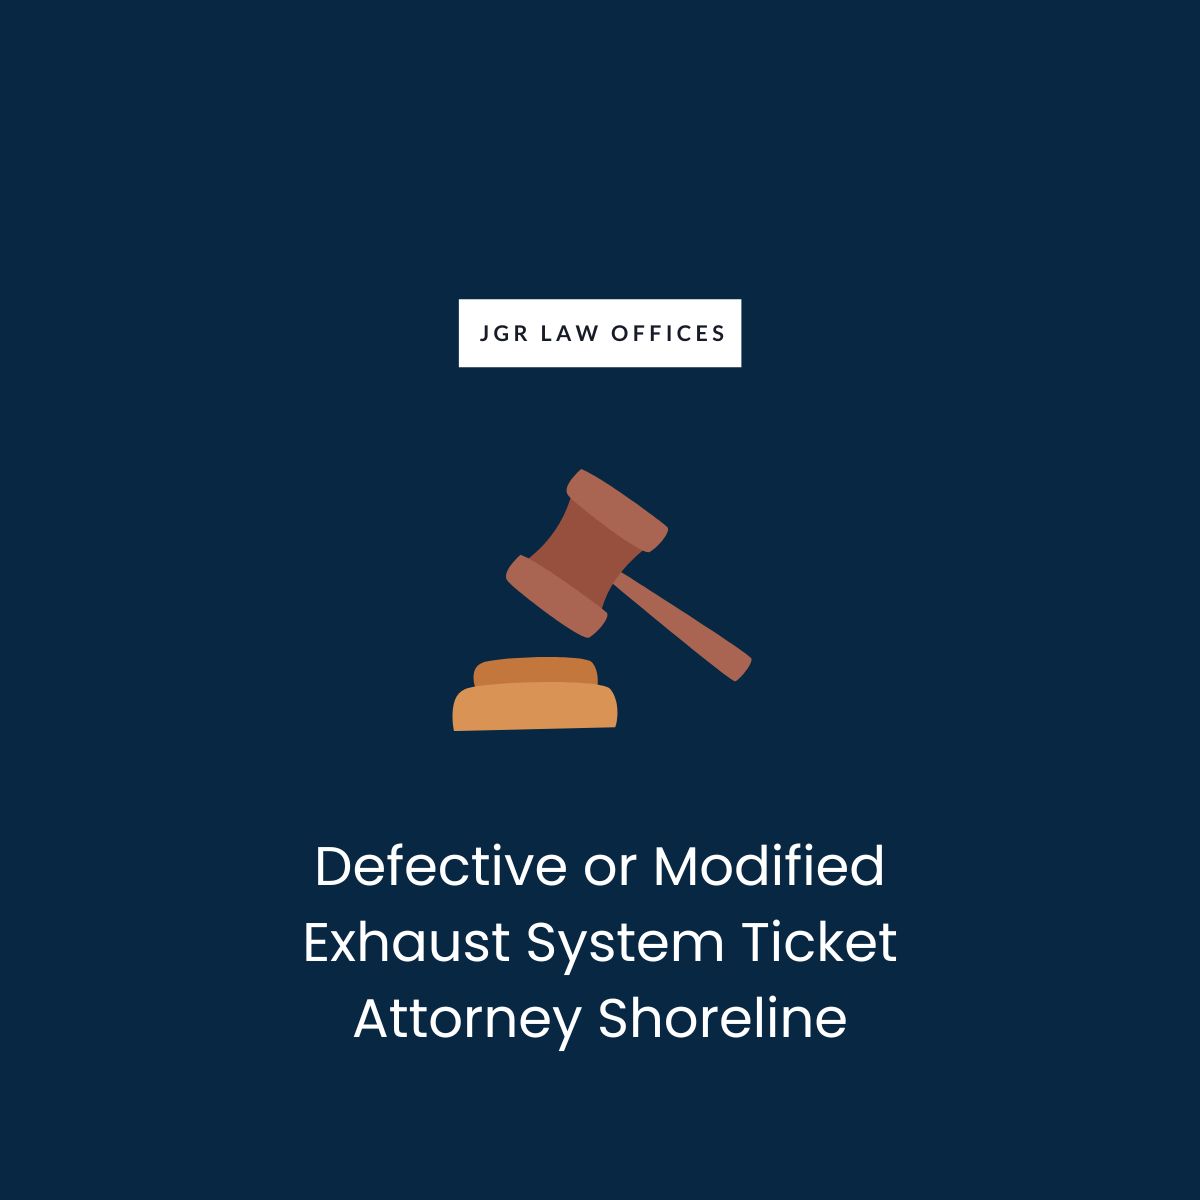 Defective or Modified Exhaust System Ticket Attorney Shoreline